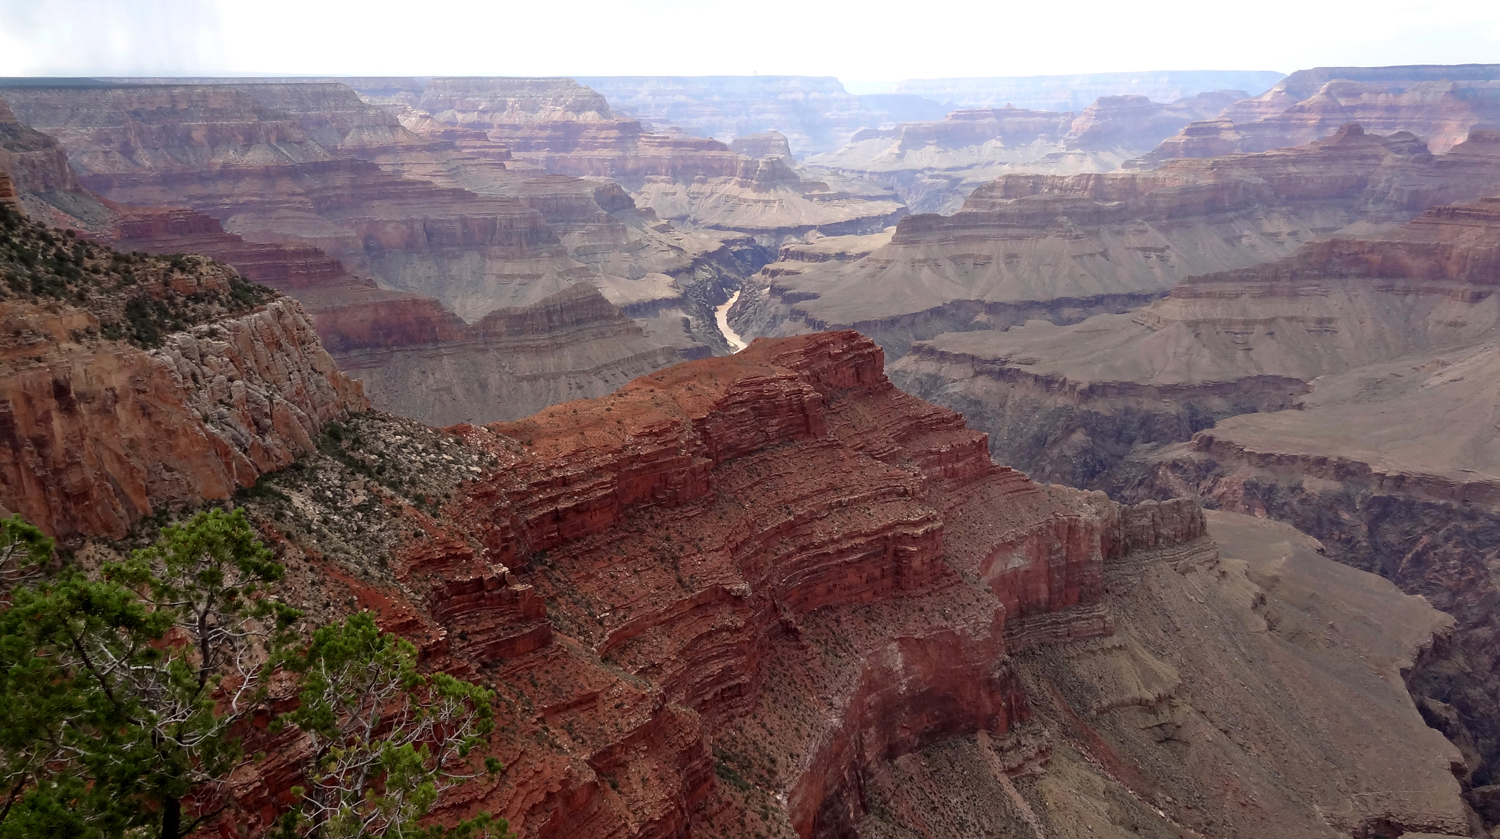 Overall view from the south Rim of the Grand Canyon near Tusayan, Arizona